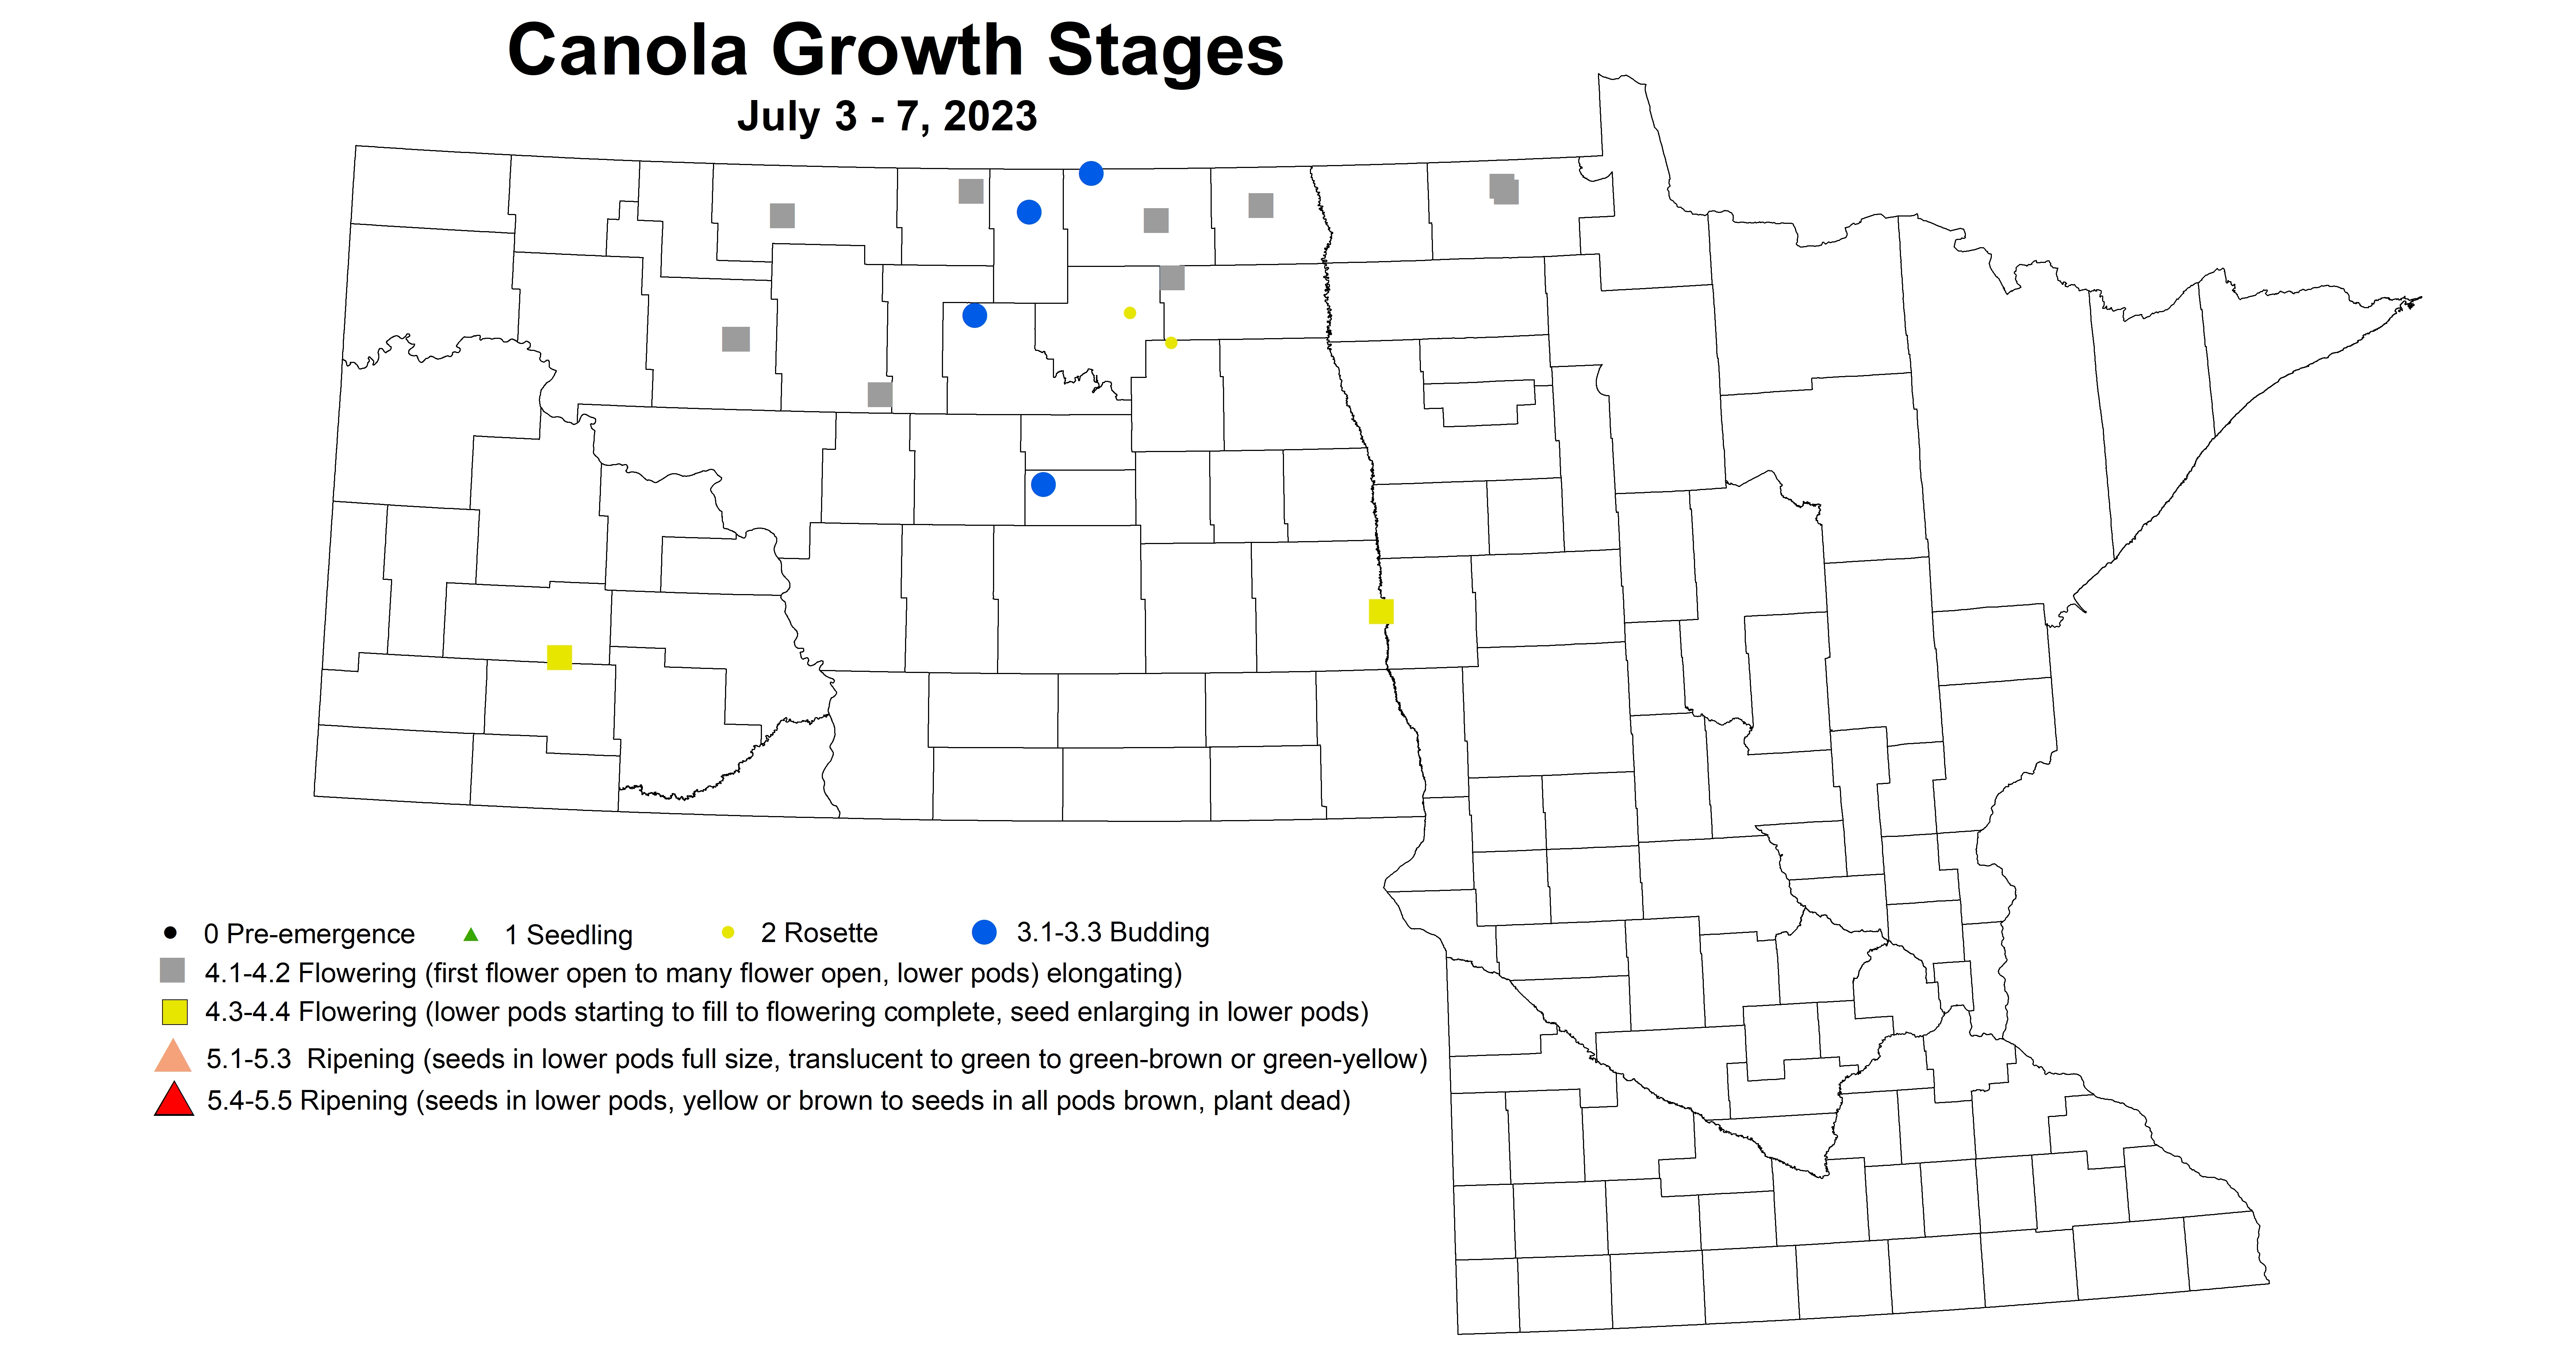 canola growth stages July 3-7 2023